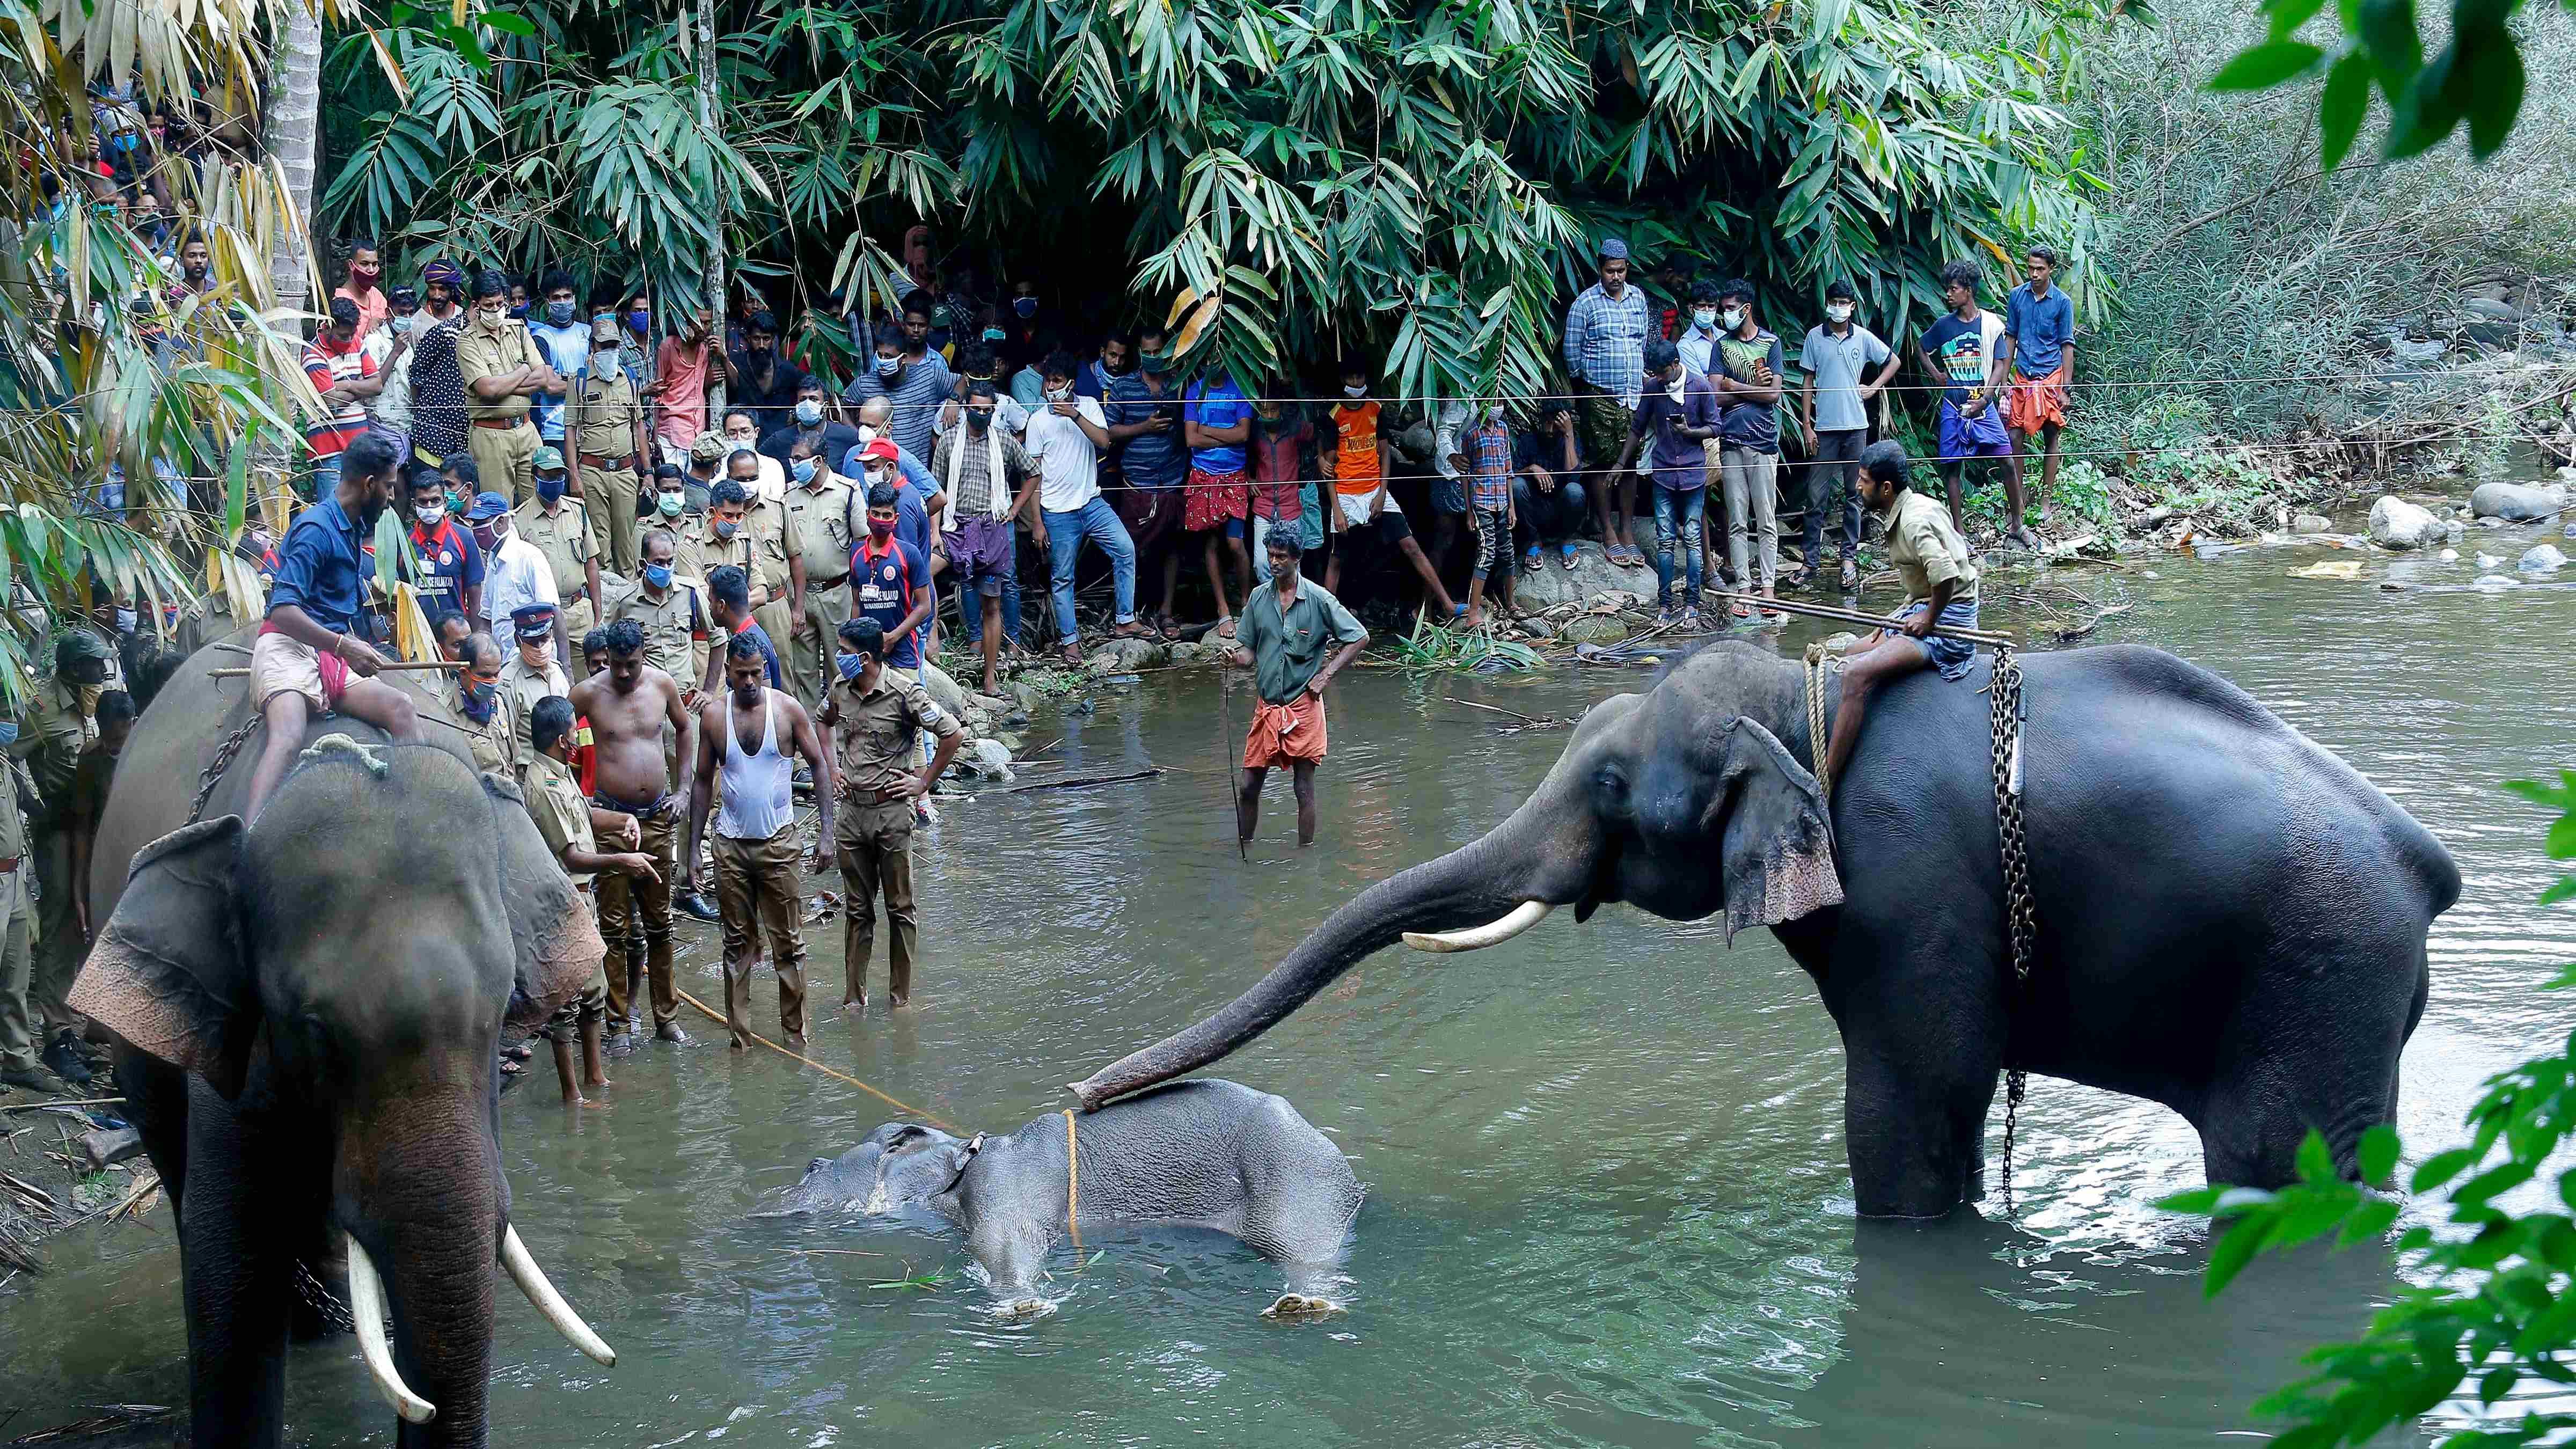 show elephants standing by a 15-year-old pregnant wild elephant who died after suffering injuries, in Velliyar River, Palakkad district of Kerala. Credit: AP Photo